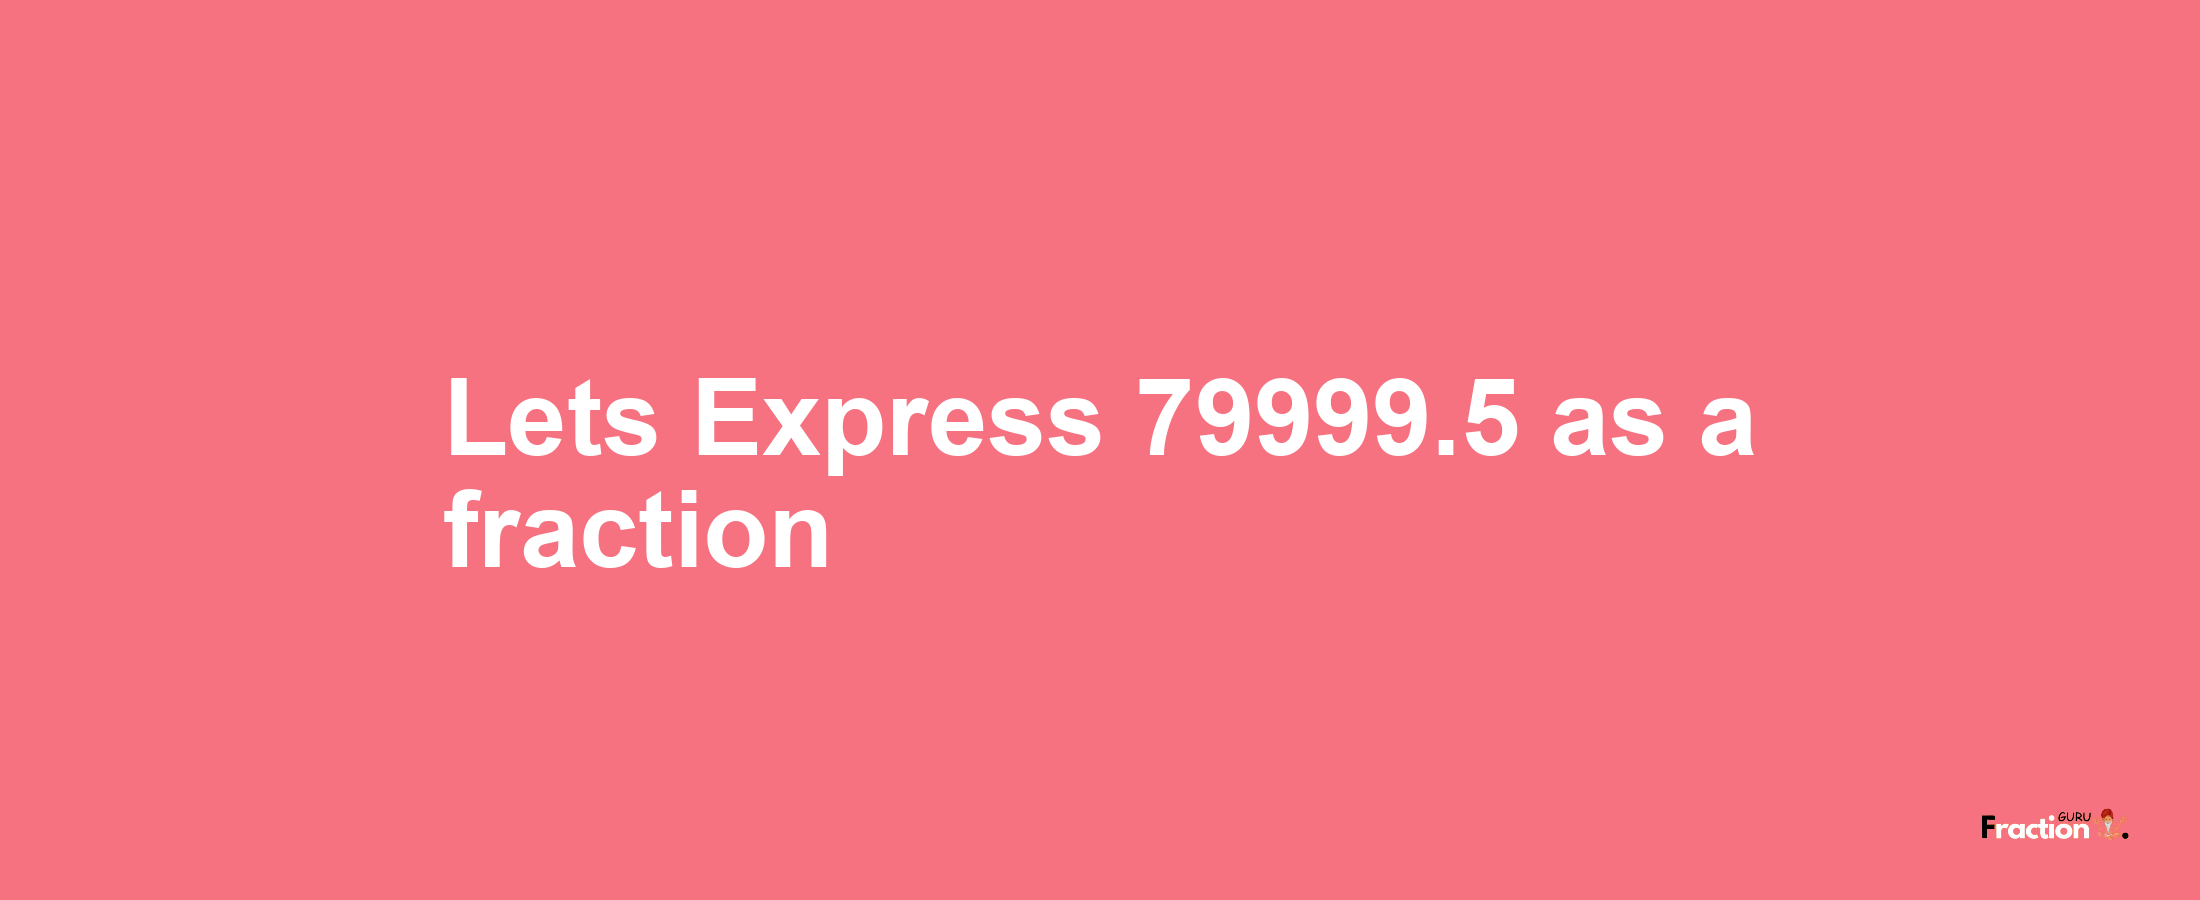 Lets Express 79999.5 as afraction